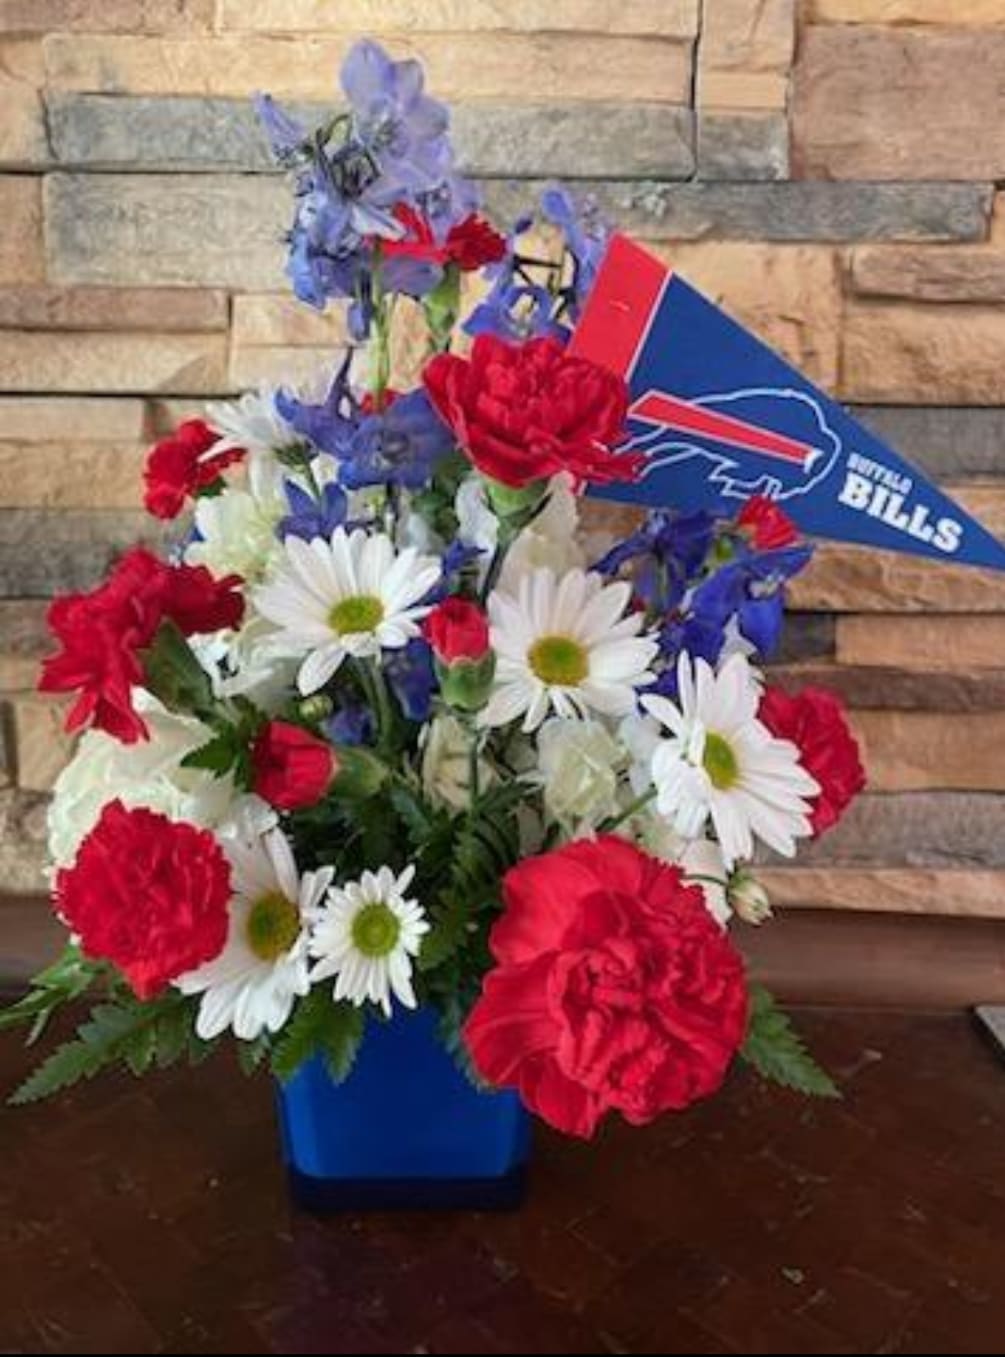 Bills Holiday Bouquet to send a loyal Bills fan with lush red